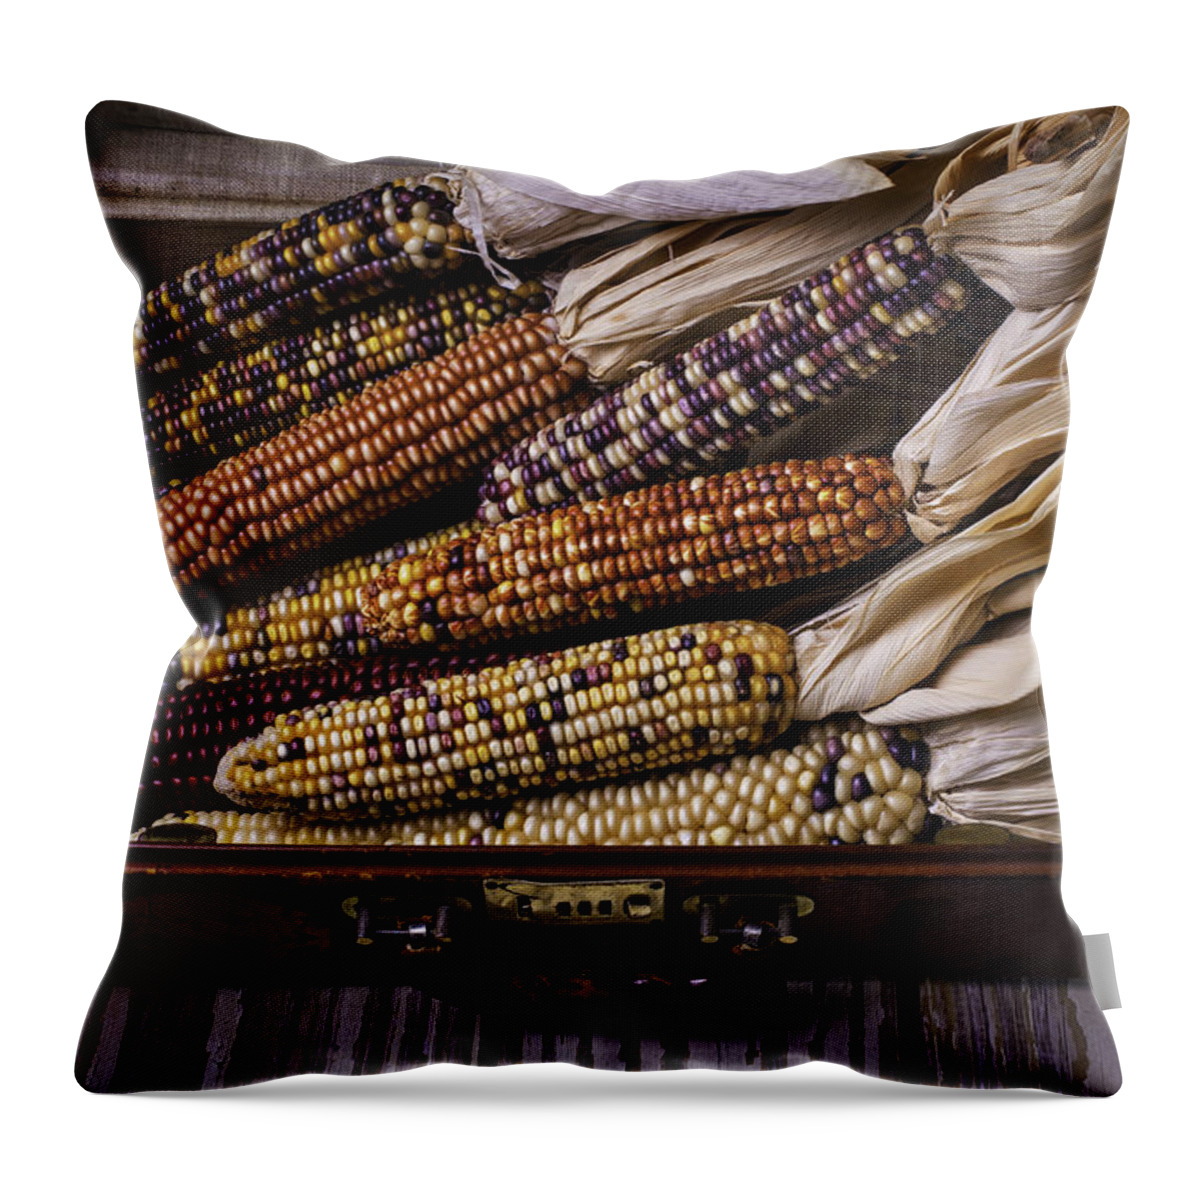 Suitcase Throw Pillow featuring the photograph Suitcase Full Of Indian Corn by Garry Gay